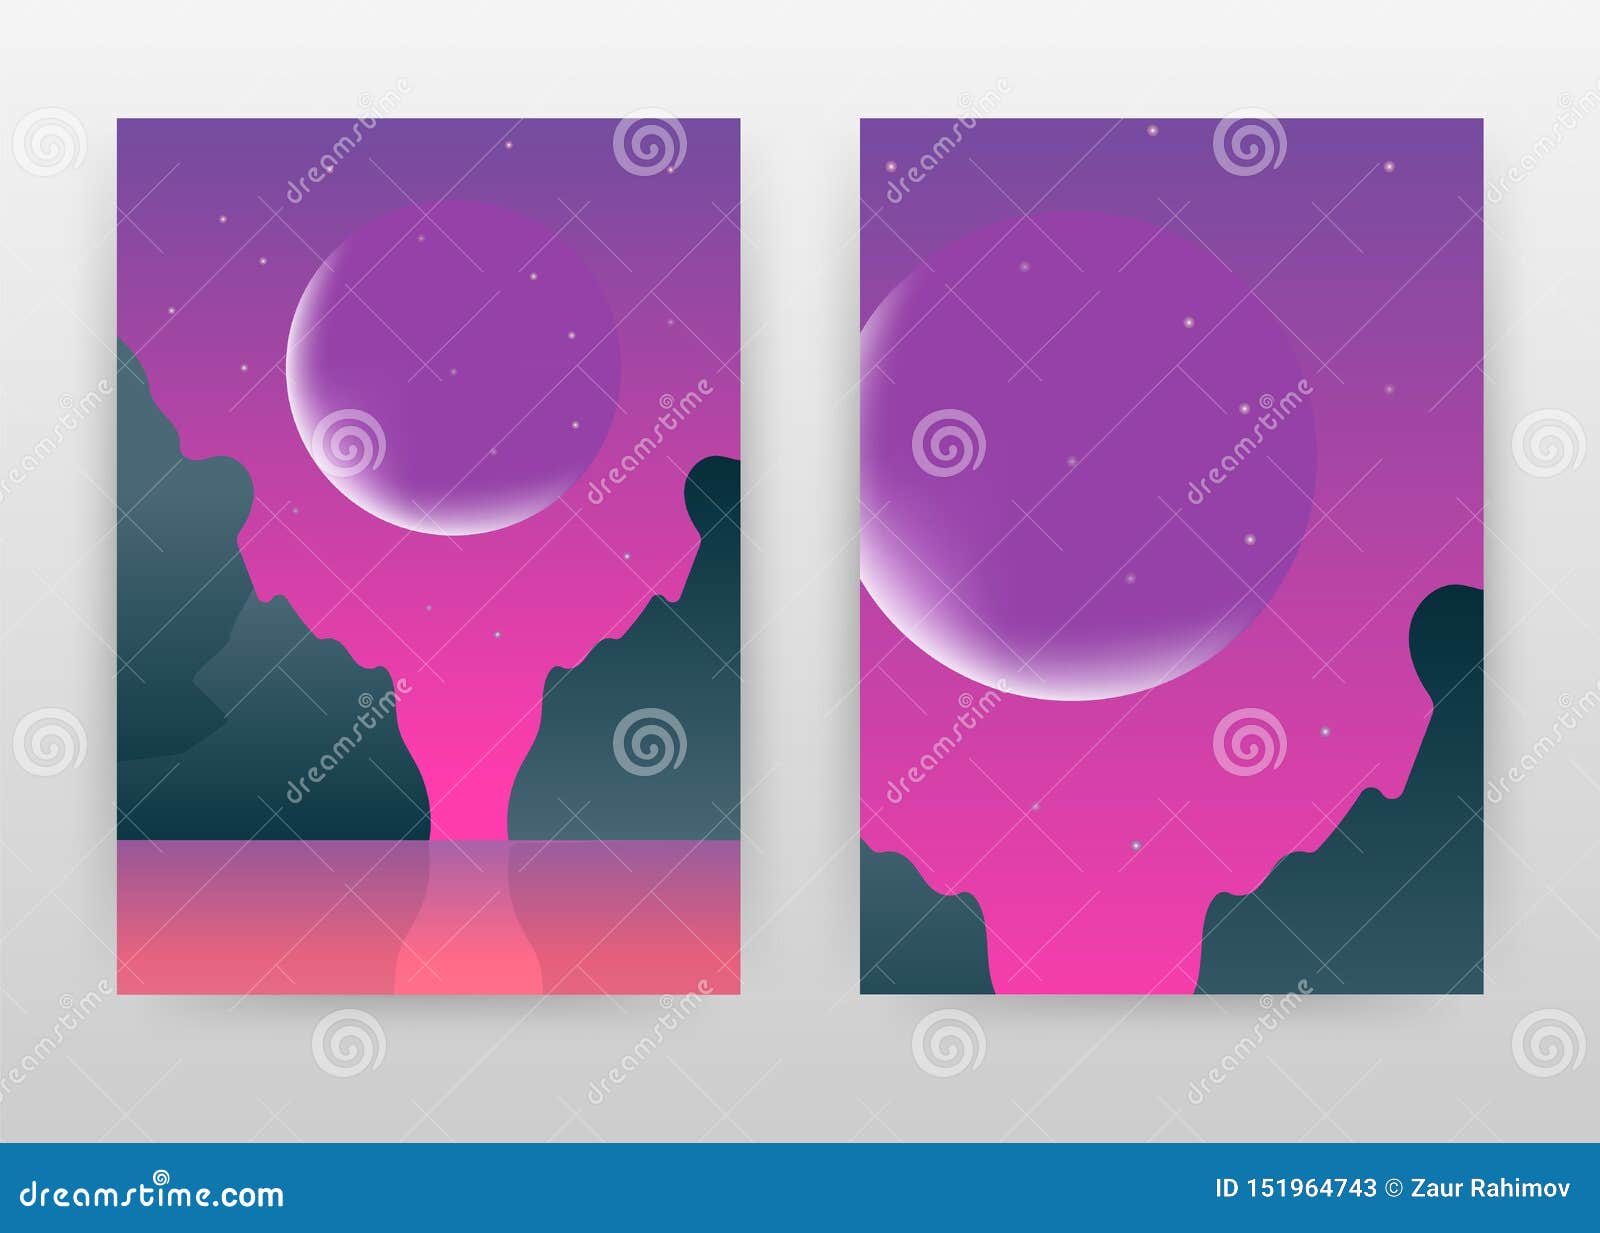 Purple Moon, Earth with Stars Behind Mountans Landscape Business Design ...